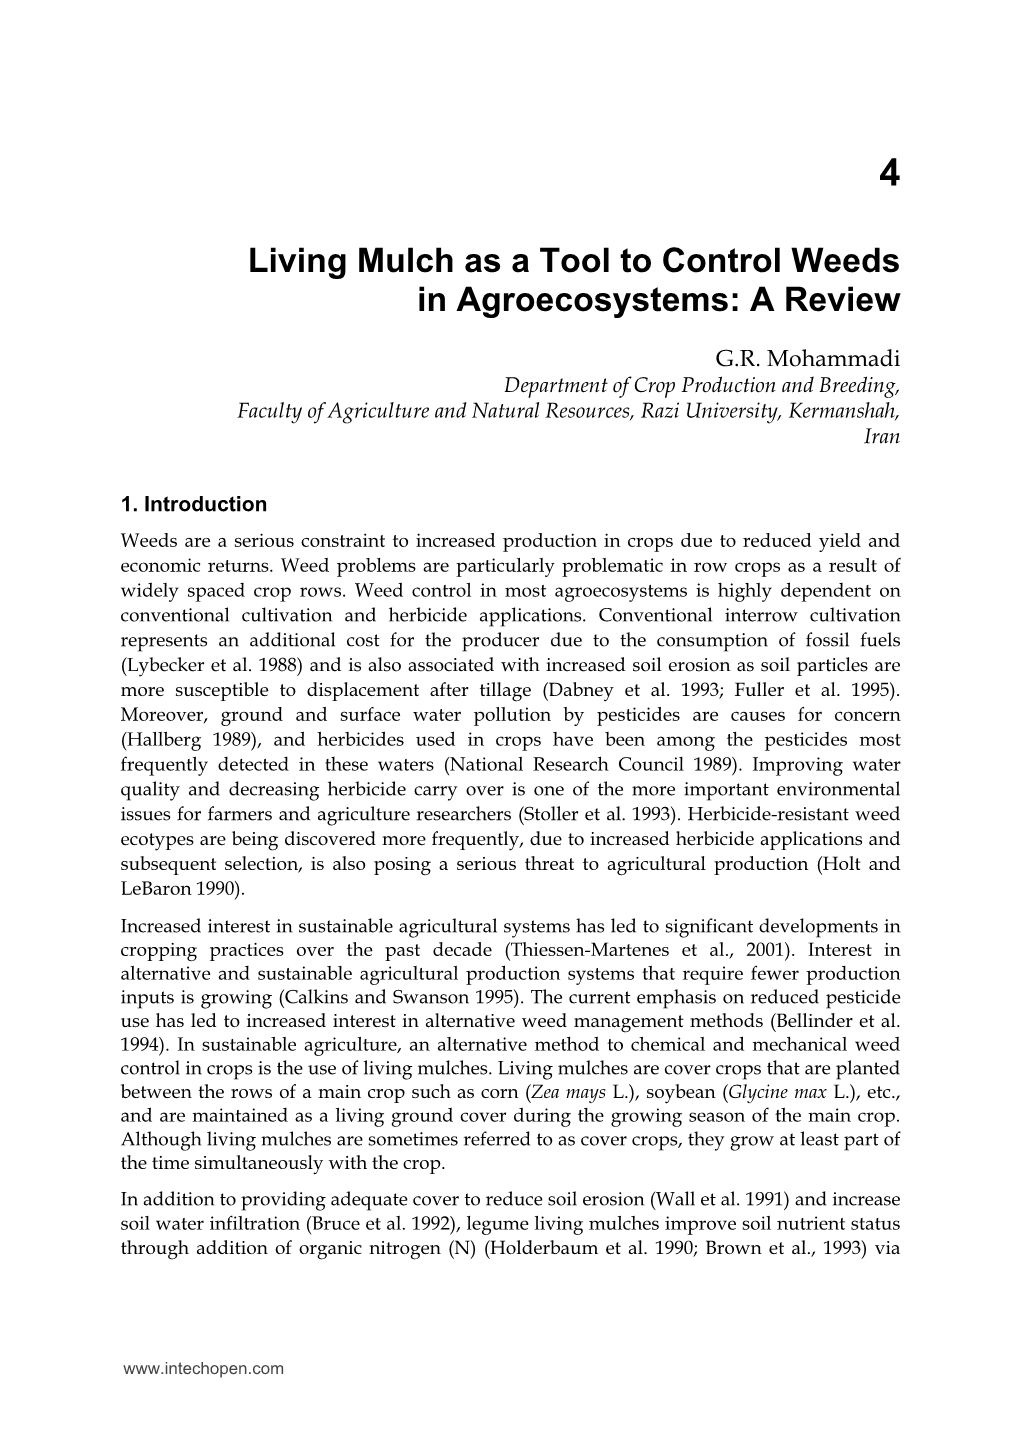 Living Mulch As a Tool to Control Weeds in Agroecosystems: a Review